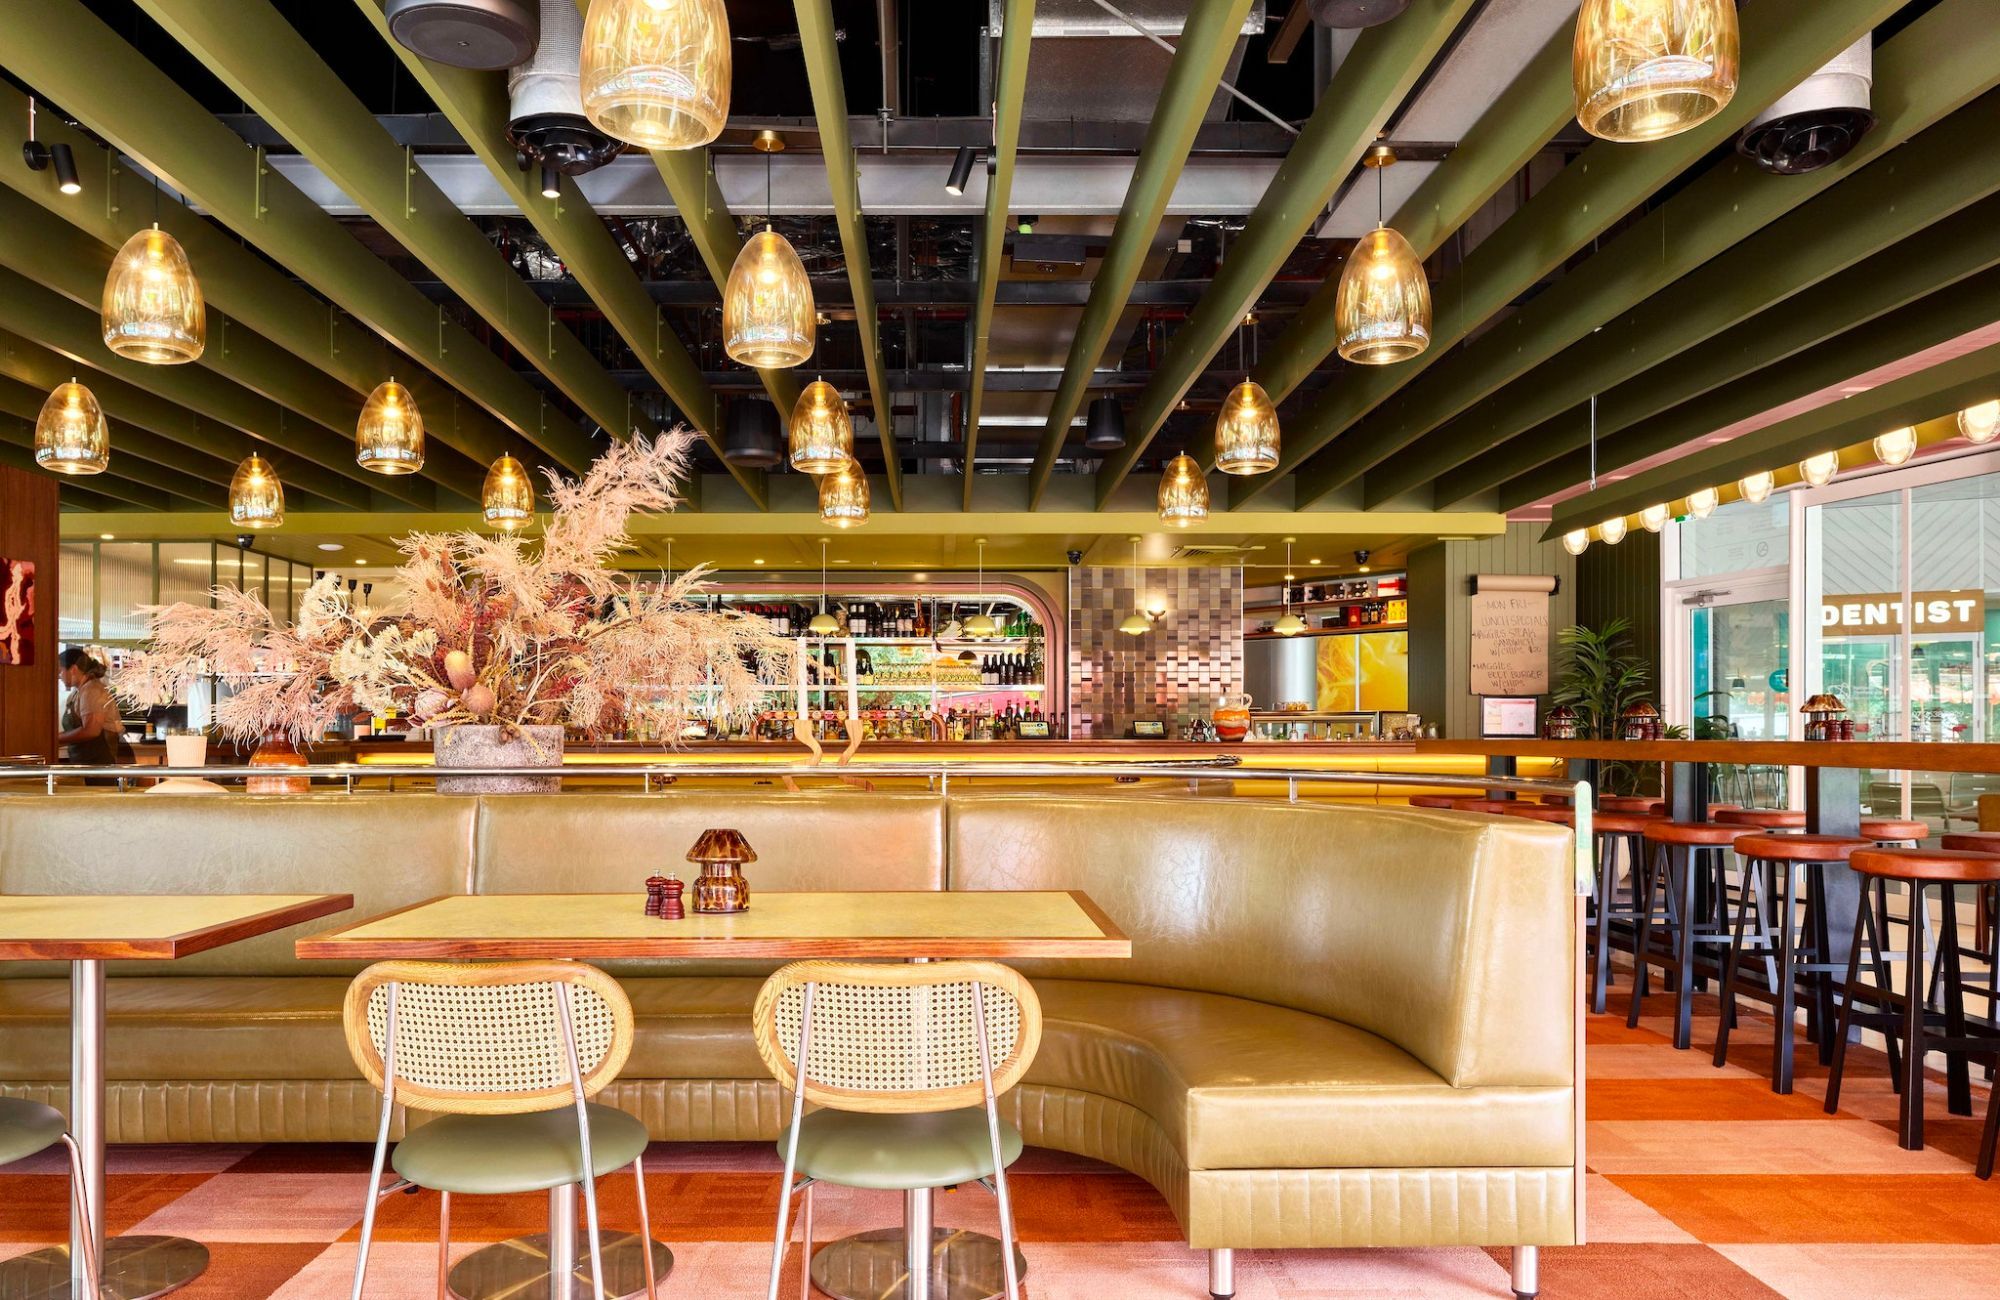 Maggie May Supper Club by BSPN Architecture showing interior of restaurant